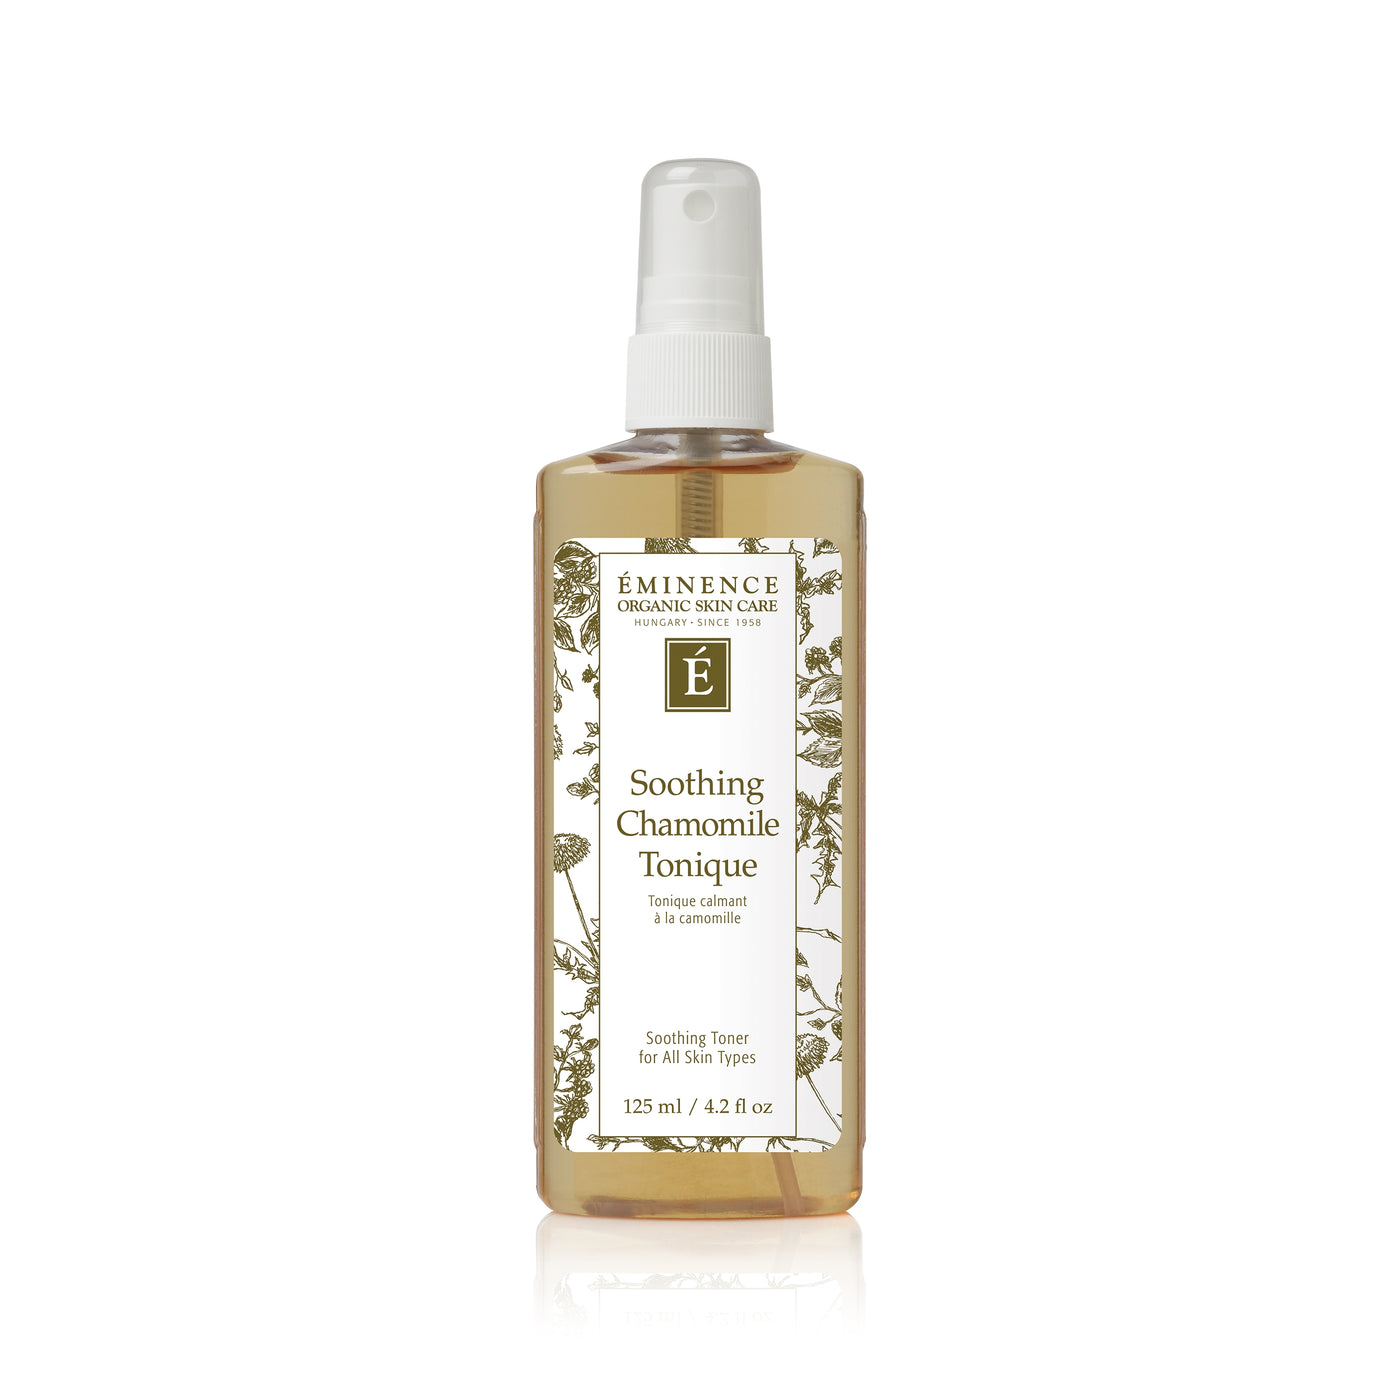 Eminence Organics Soothing Chamomile Tonique - Radiance Clean Beauty